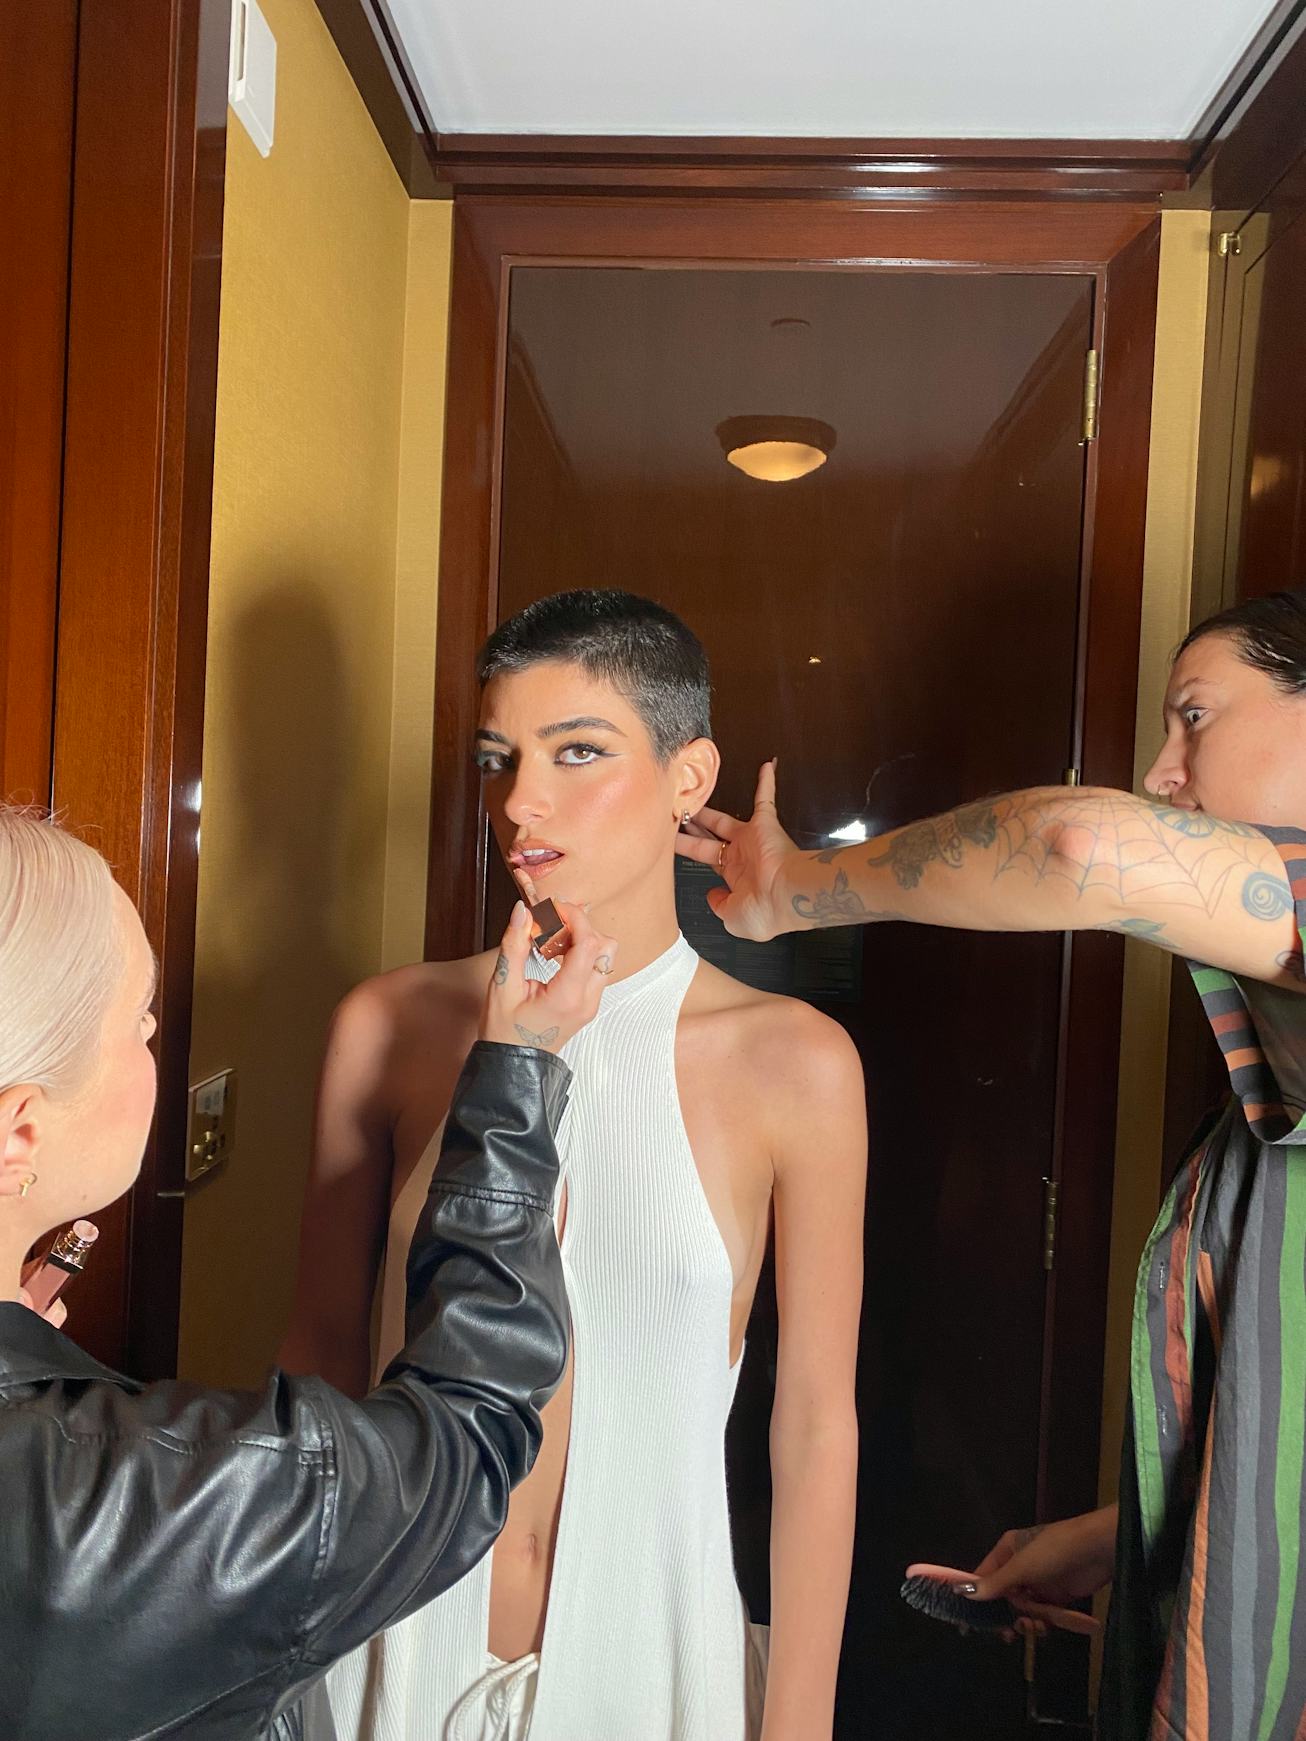 The singer Dixie D’Amelio getting ready for the Puma’s NYFW Show